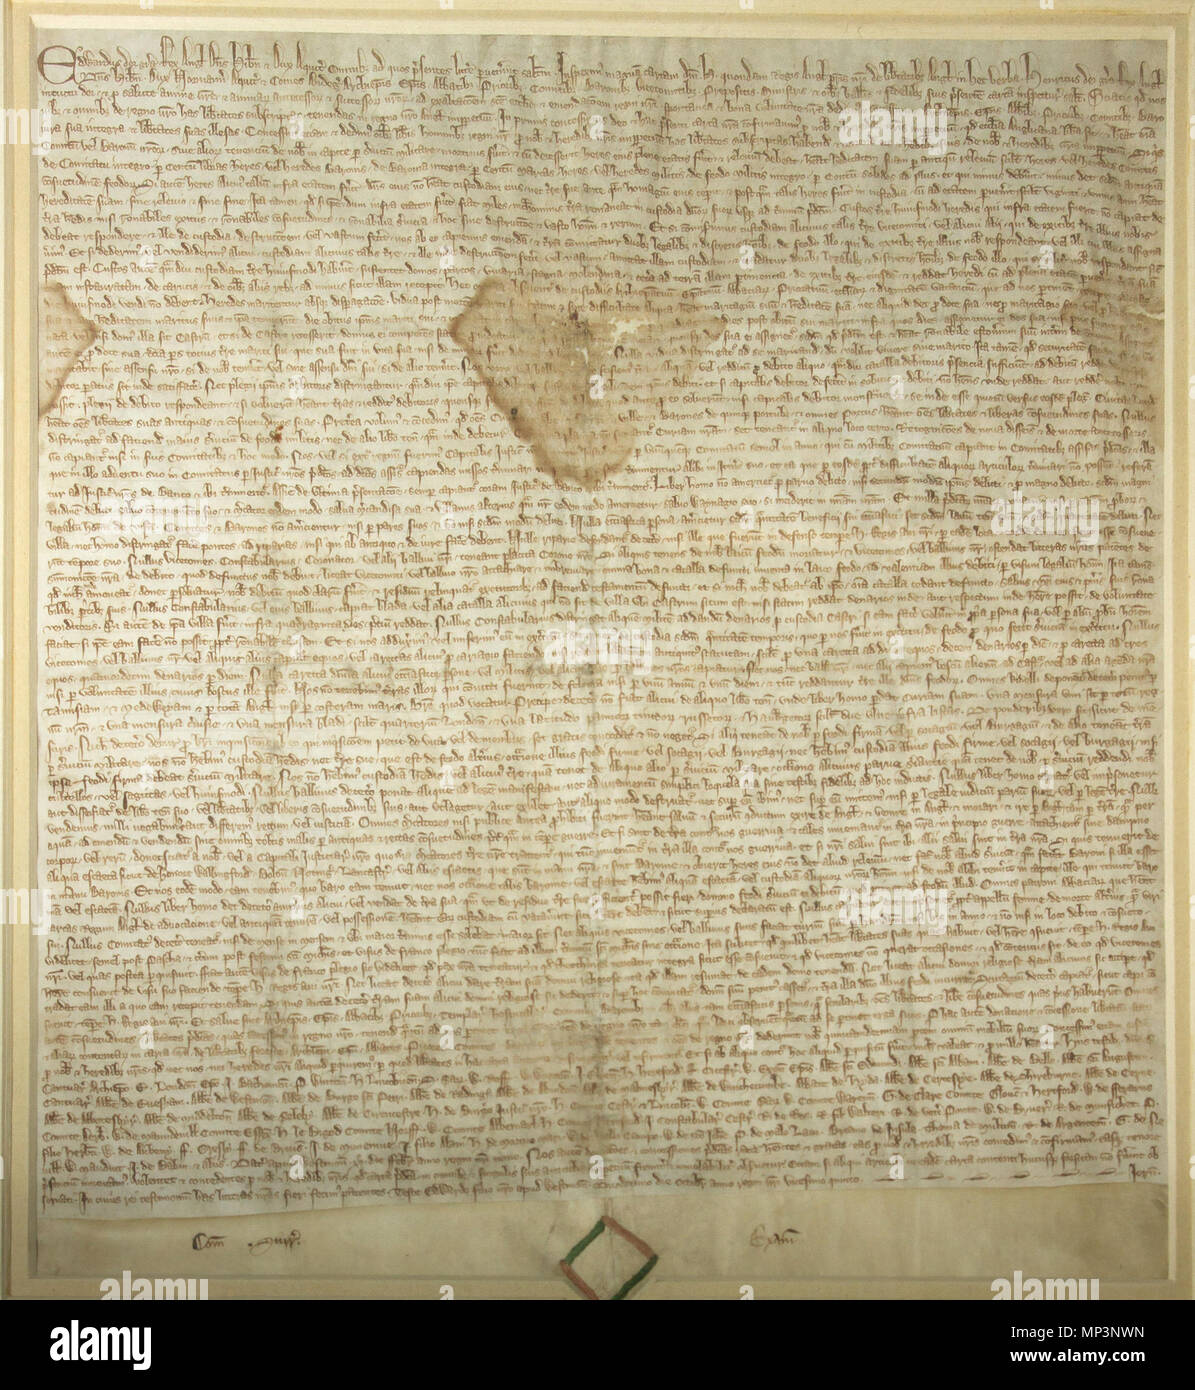 . English: A 1297 copy of the Magna Carta which is on display in the Members' Hall of Parliament House, Canberra, Australia. It was purchased by the Government of Australia for £12,500 from the King's School, Bruton, in Somerset, England, UK. 22 January 2012, 16:14:28. JJ Harrison (jjharrison89@facebook.com).    If you enjoy my work, and would like to see more, please subscribe to my profile on Facebook. 844 Magna Carta (1297 version, Parliament House, Canberra, Australia) Stock Photo